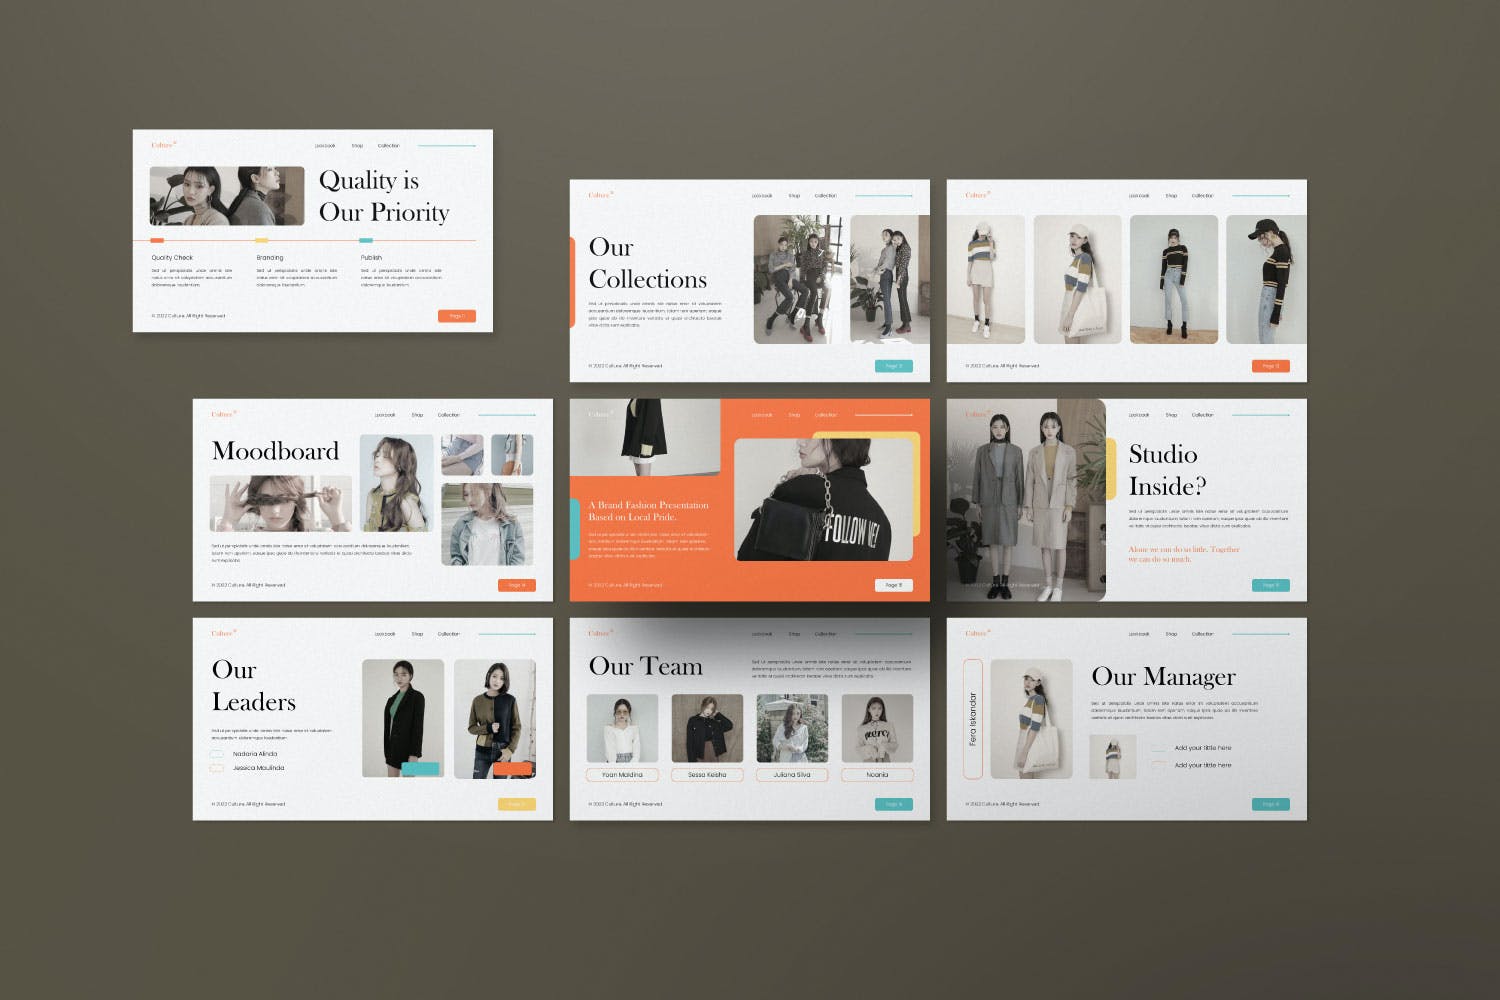 The main color of the template is grey and orange elements are added to the slides.